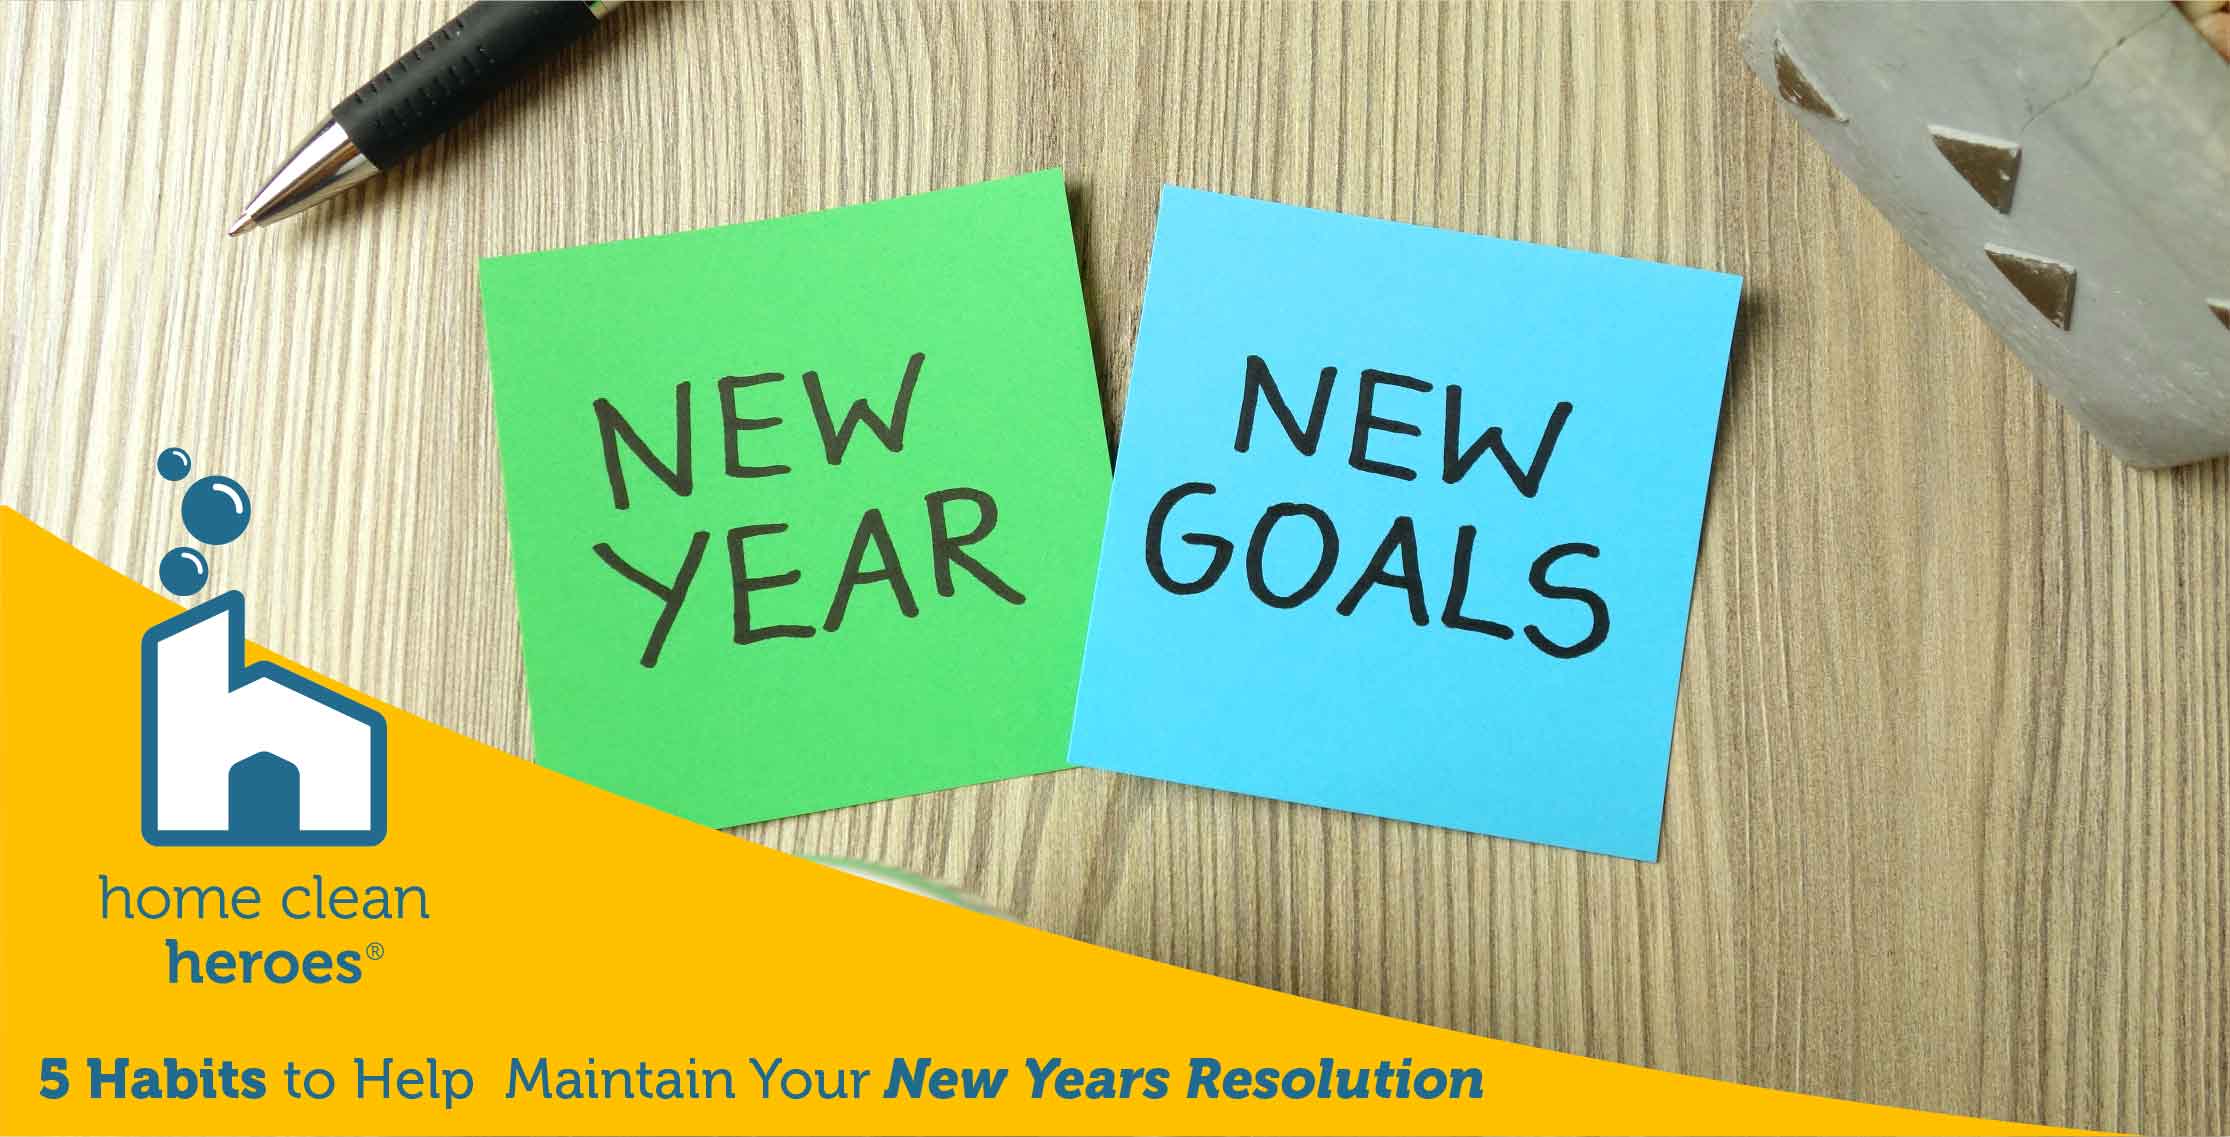 Post-It notes that say New Year New Goals on a desk